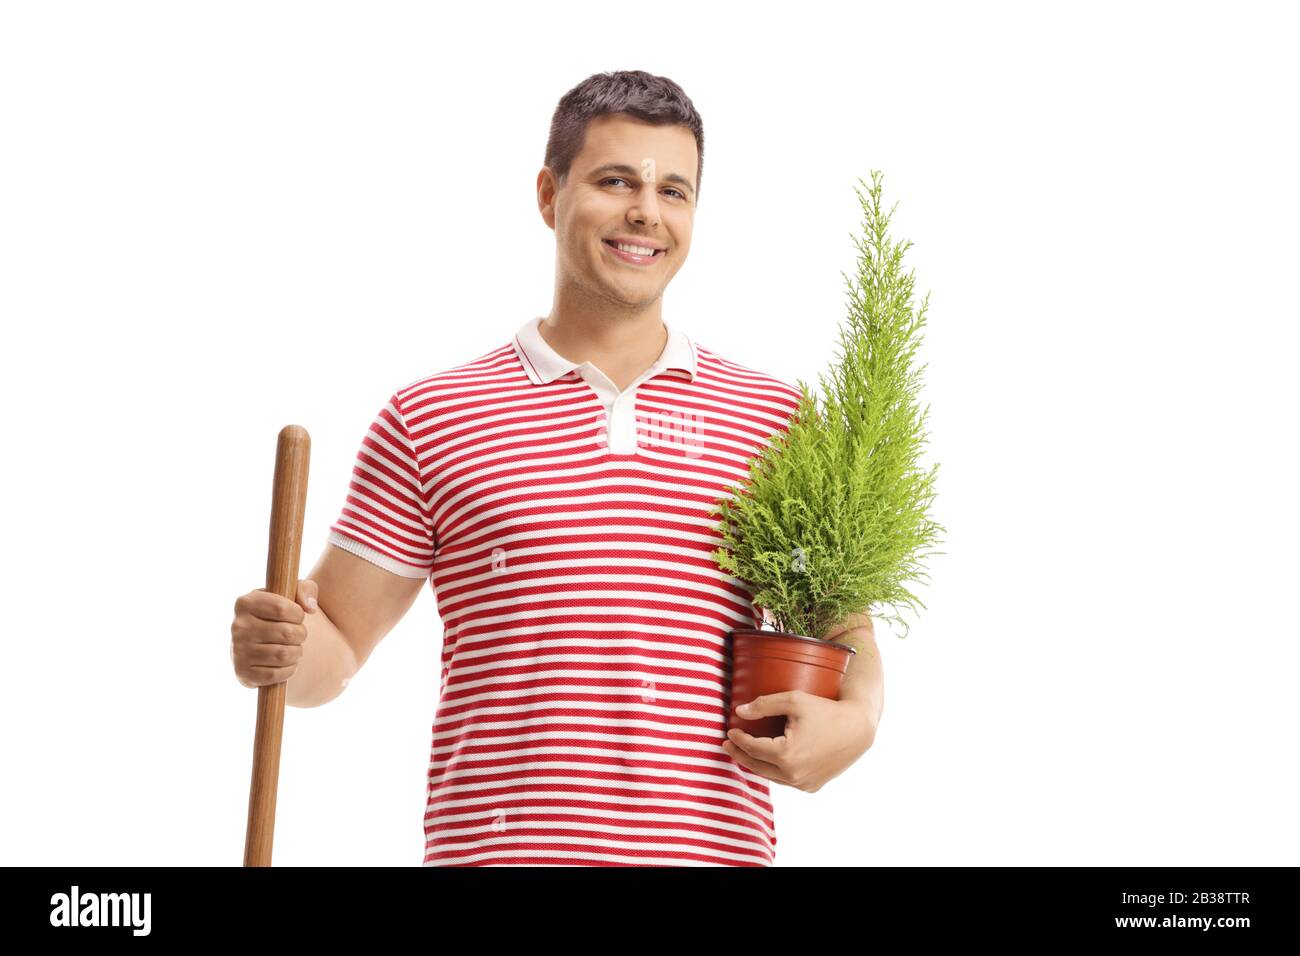 Guy with a shovel and a plant isolated on white background Stock Photo